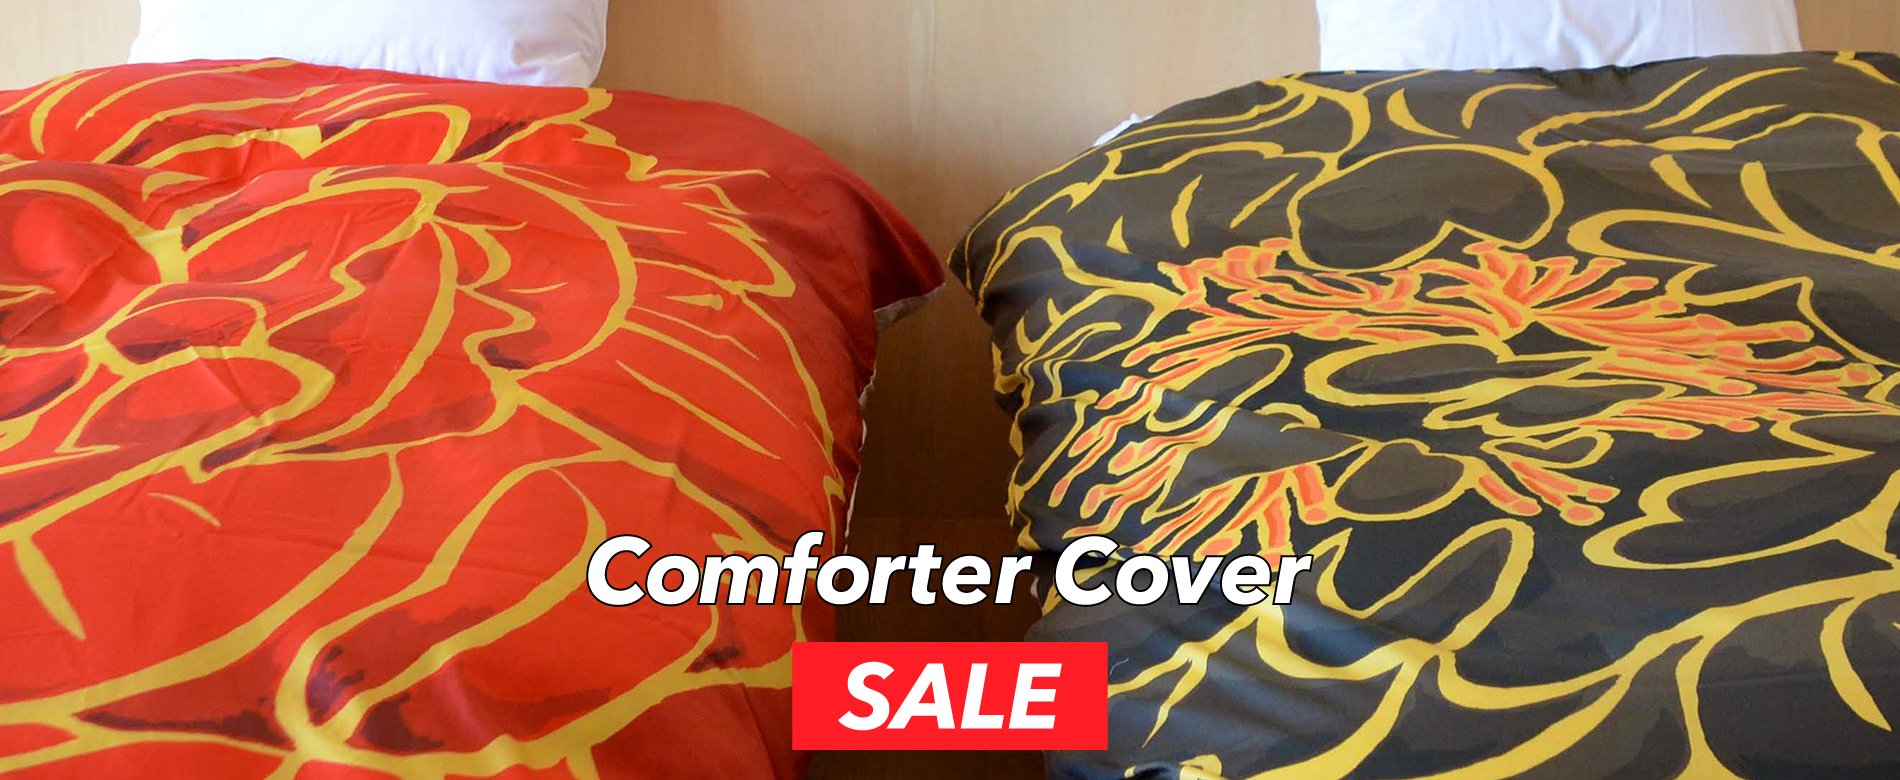 Comforter Cover SALE